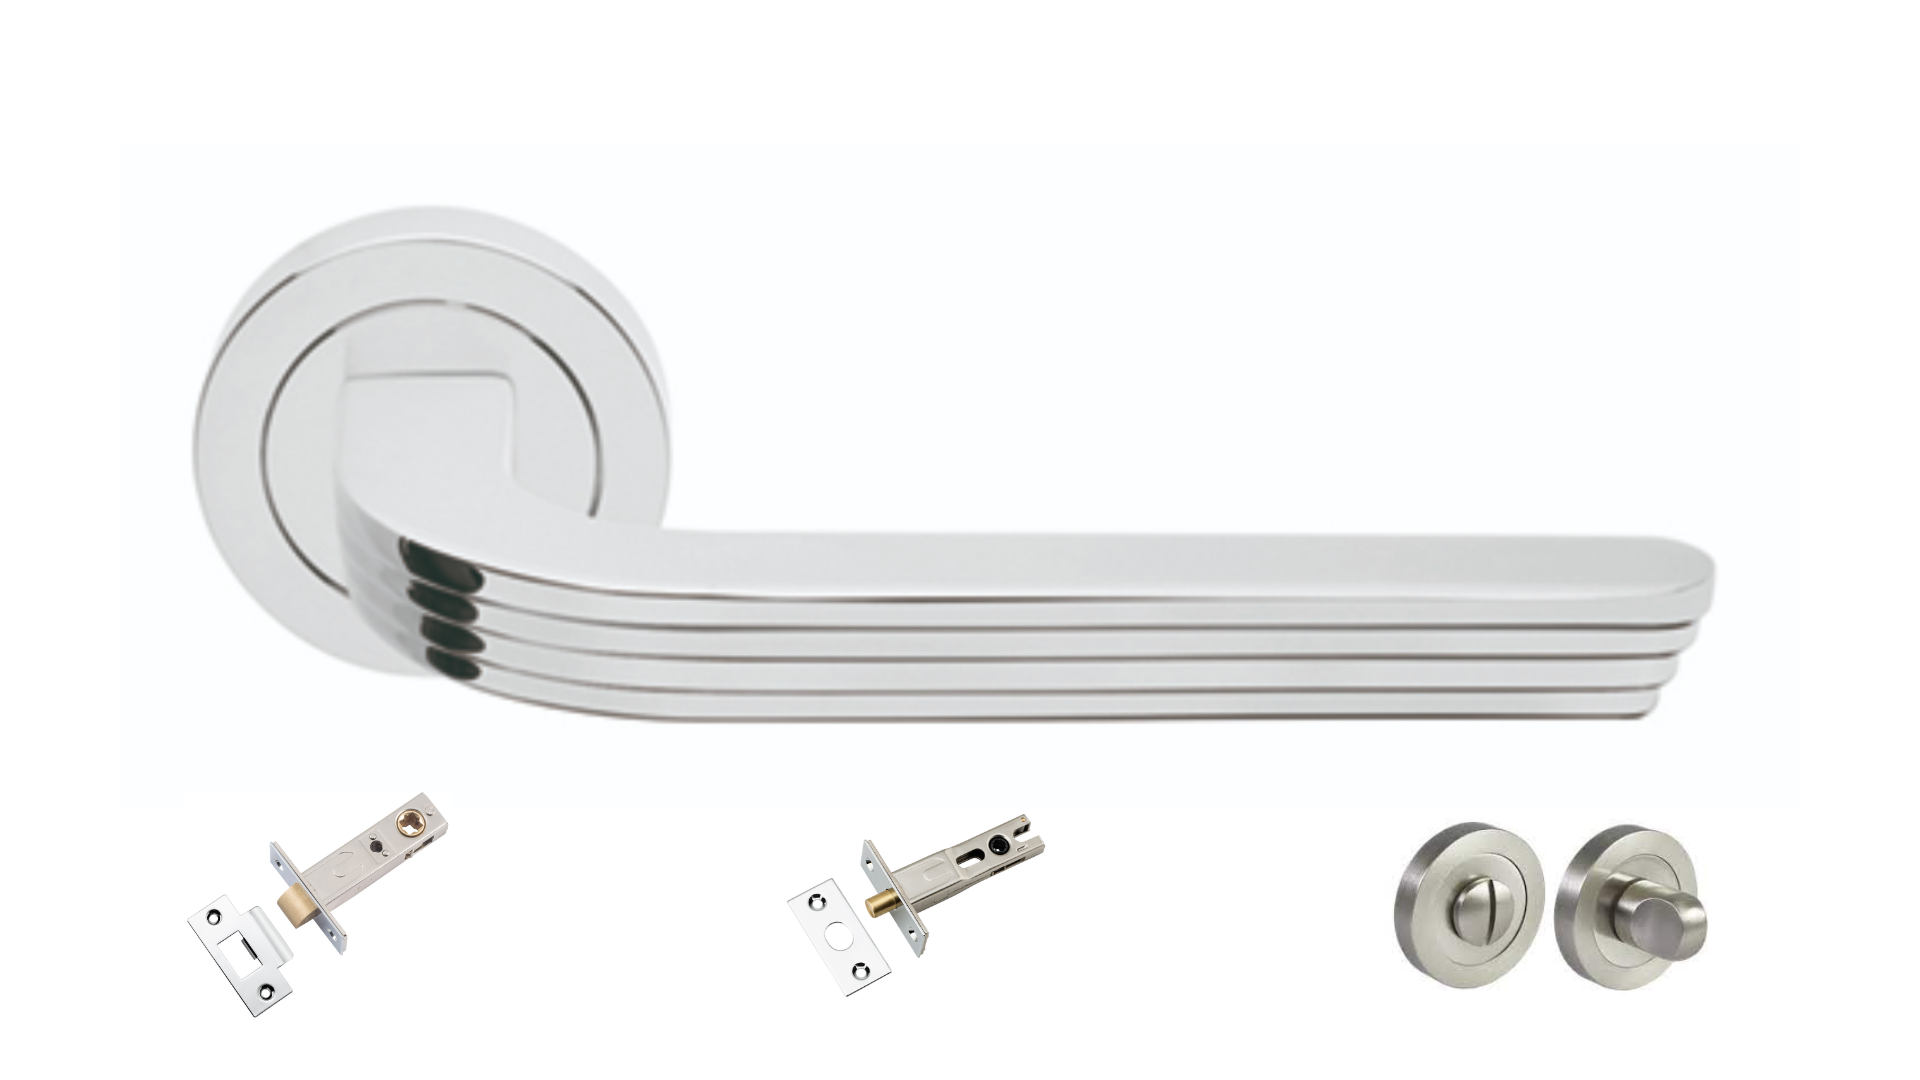 The Cloud door handle in polished chrome with a tubular latch, privacy bolt and privacy turn kit underneath on a white background.